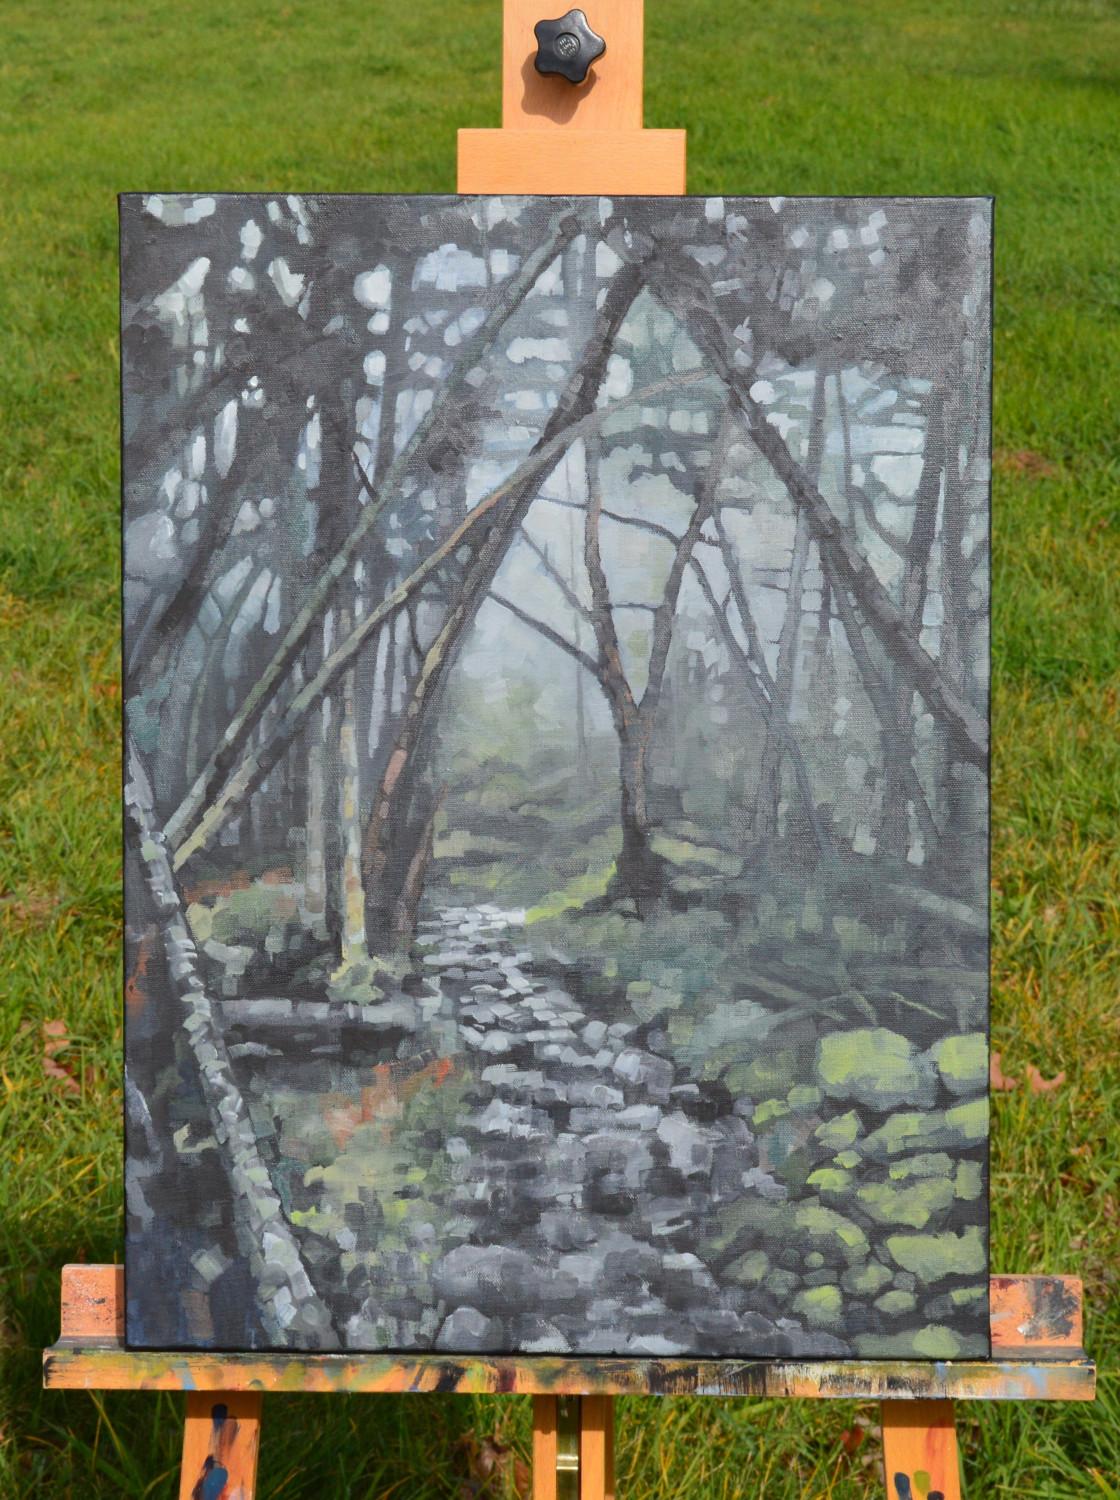 <p>Artist Comments<br>Inspired by memory and photos taken on a hiking trip, artist David Thelen captures the woodland's moody atmosphere. Barren trees loom along the rocky trail, while the fog shrouds the distant path. The muted palette infuses the